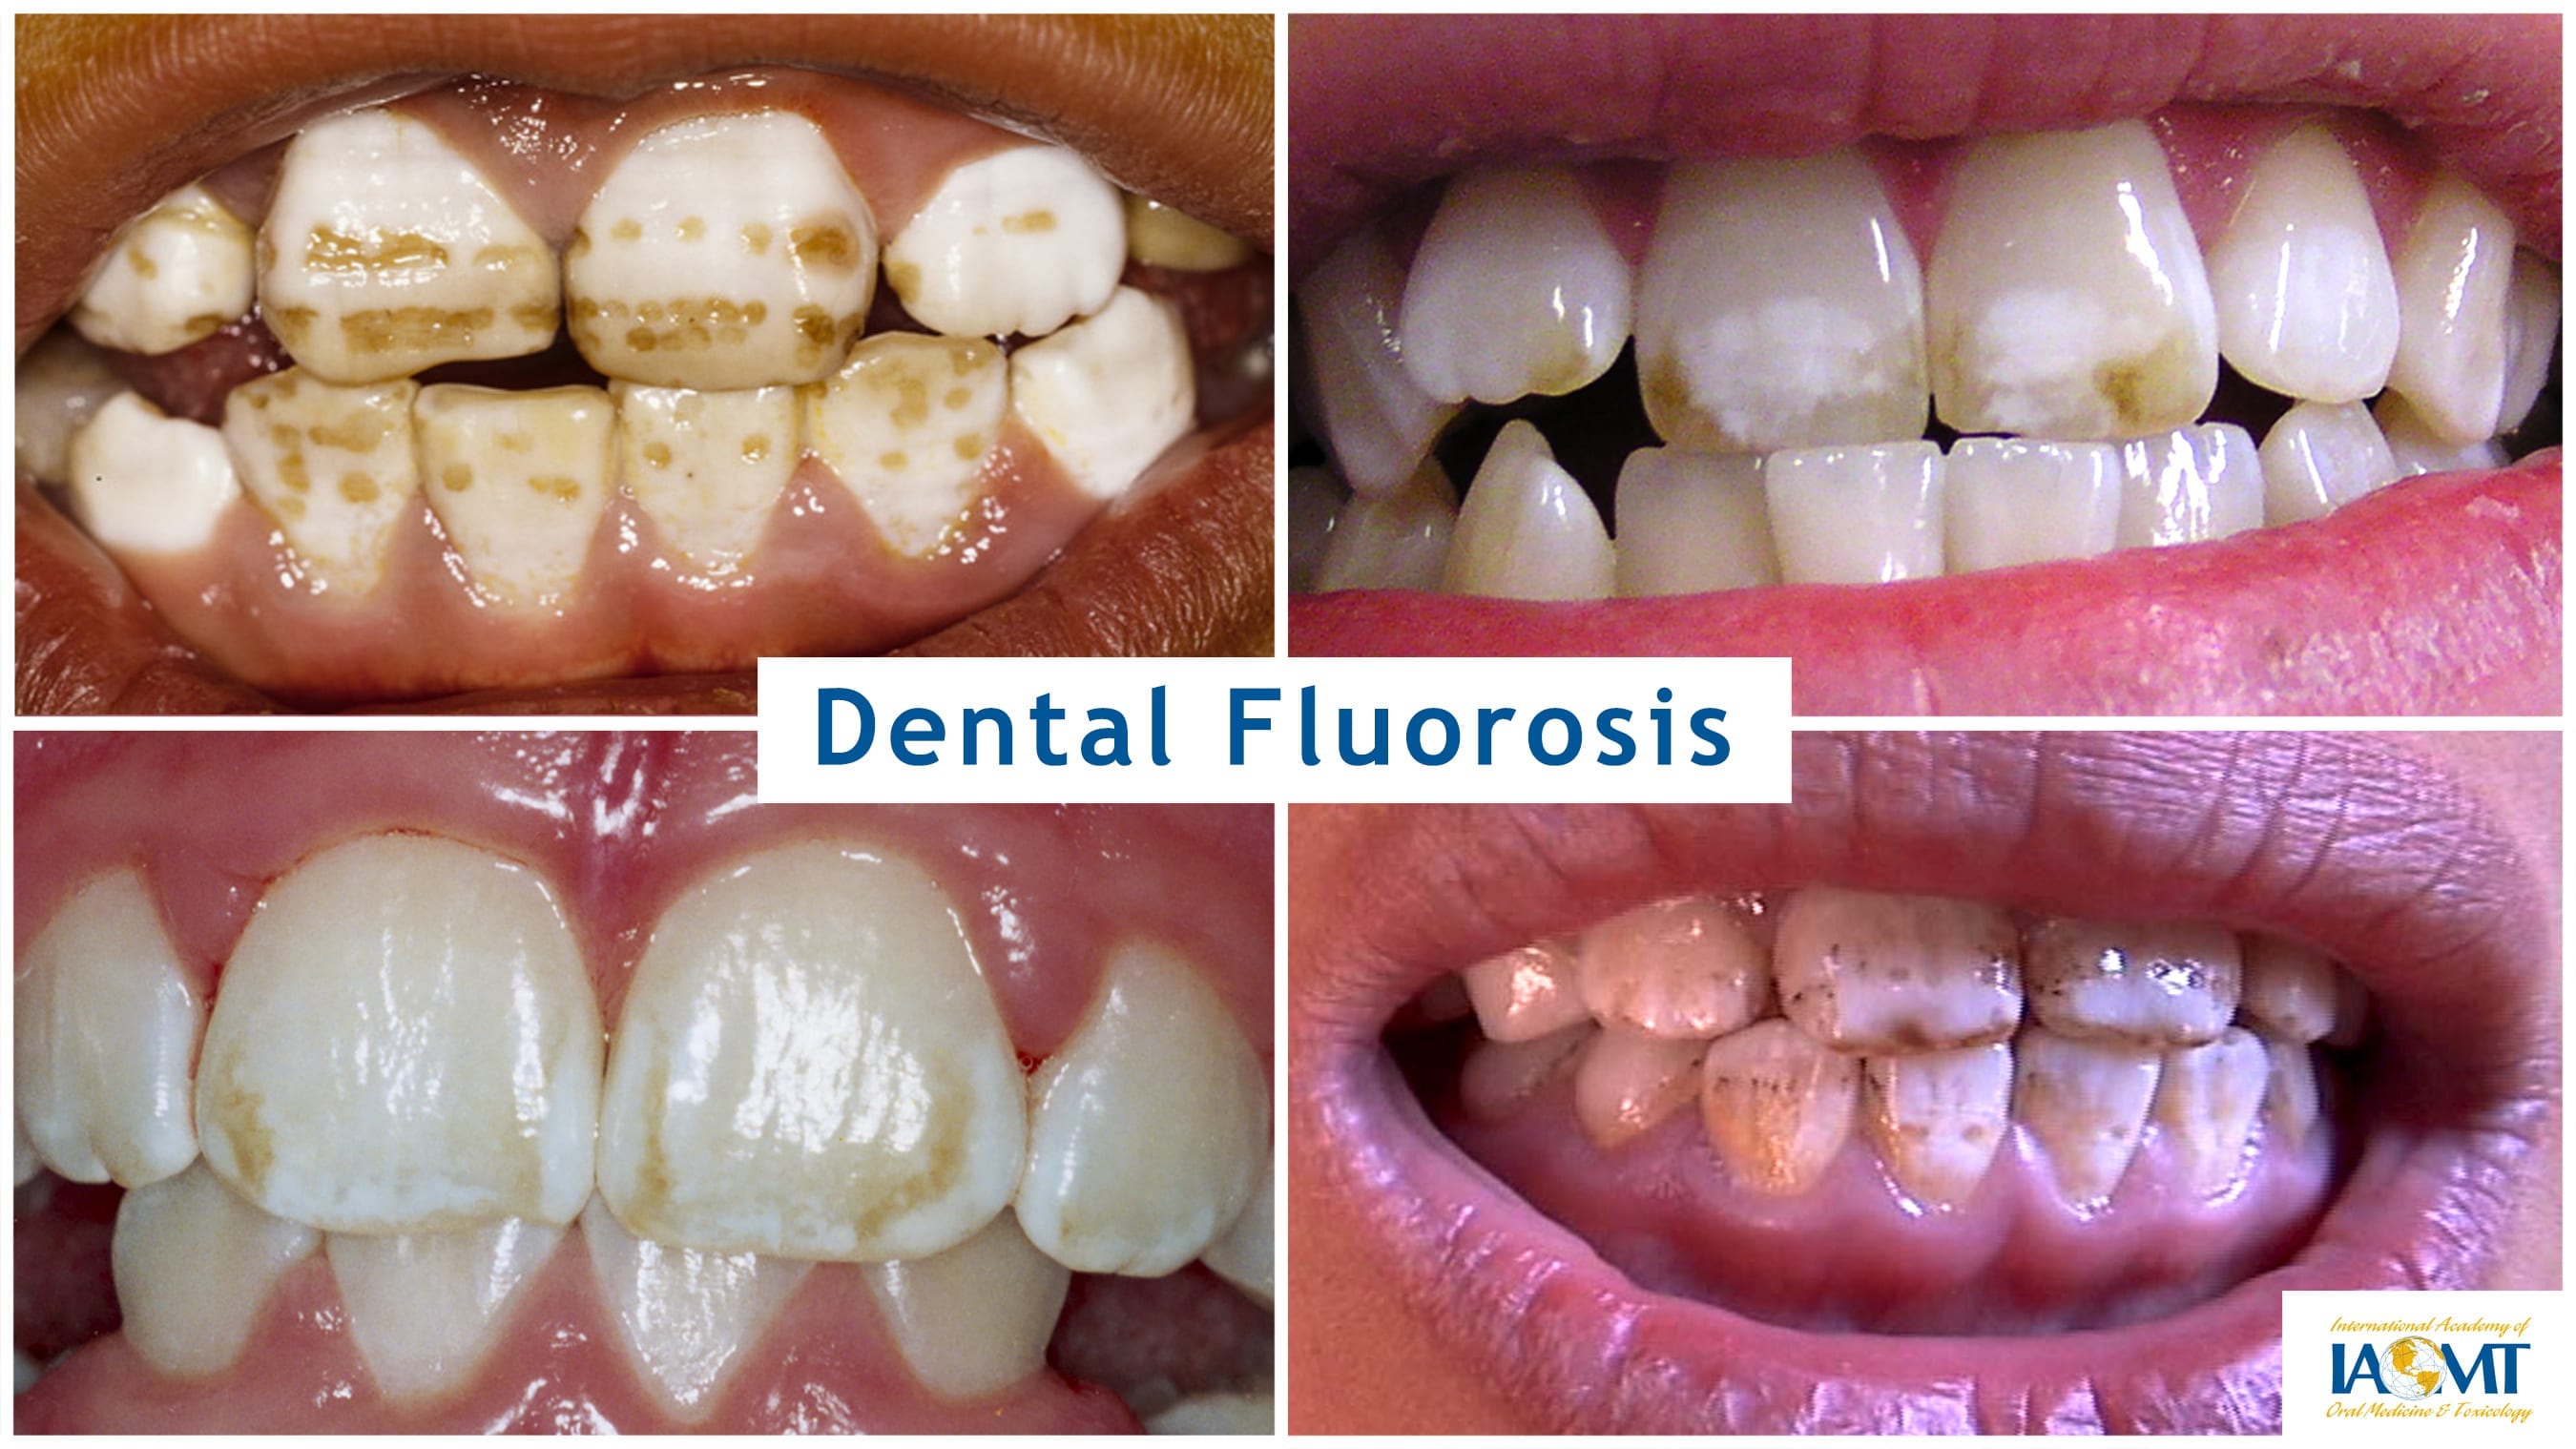 examples of damage to teeth, including staining and mottling ranging from mild to severe, from dental fluorosis caused by fluoride